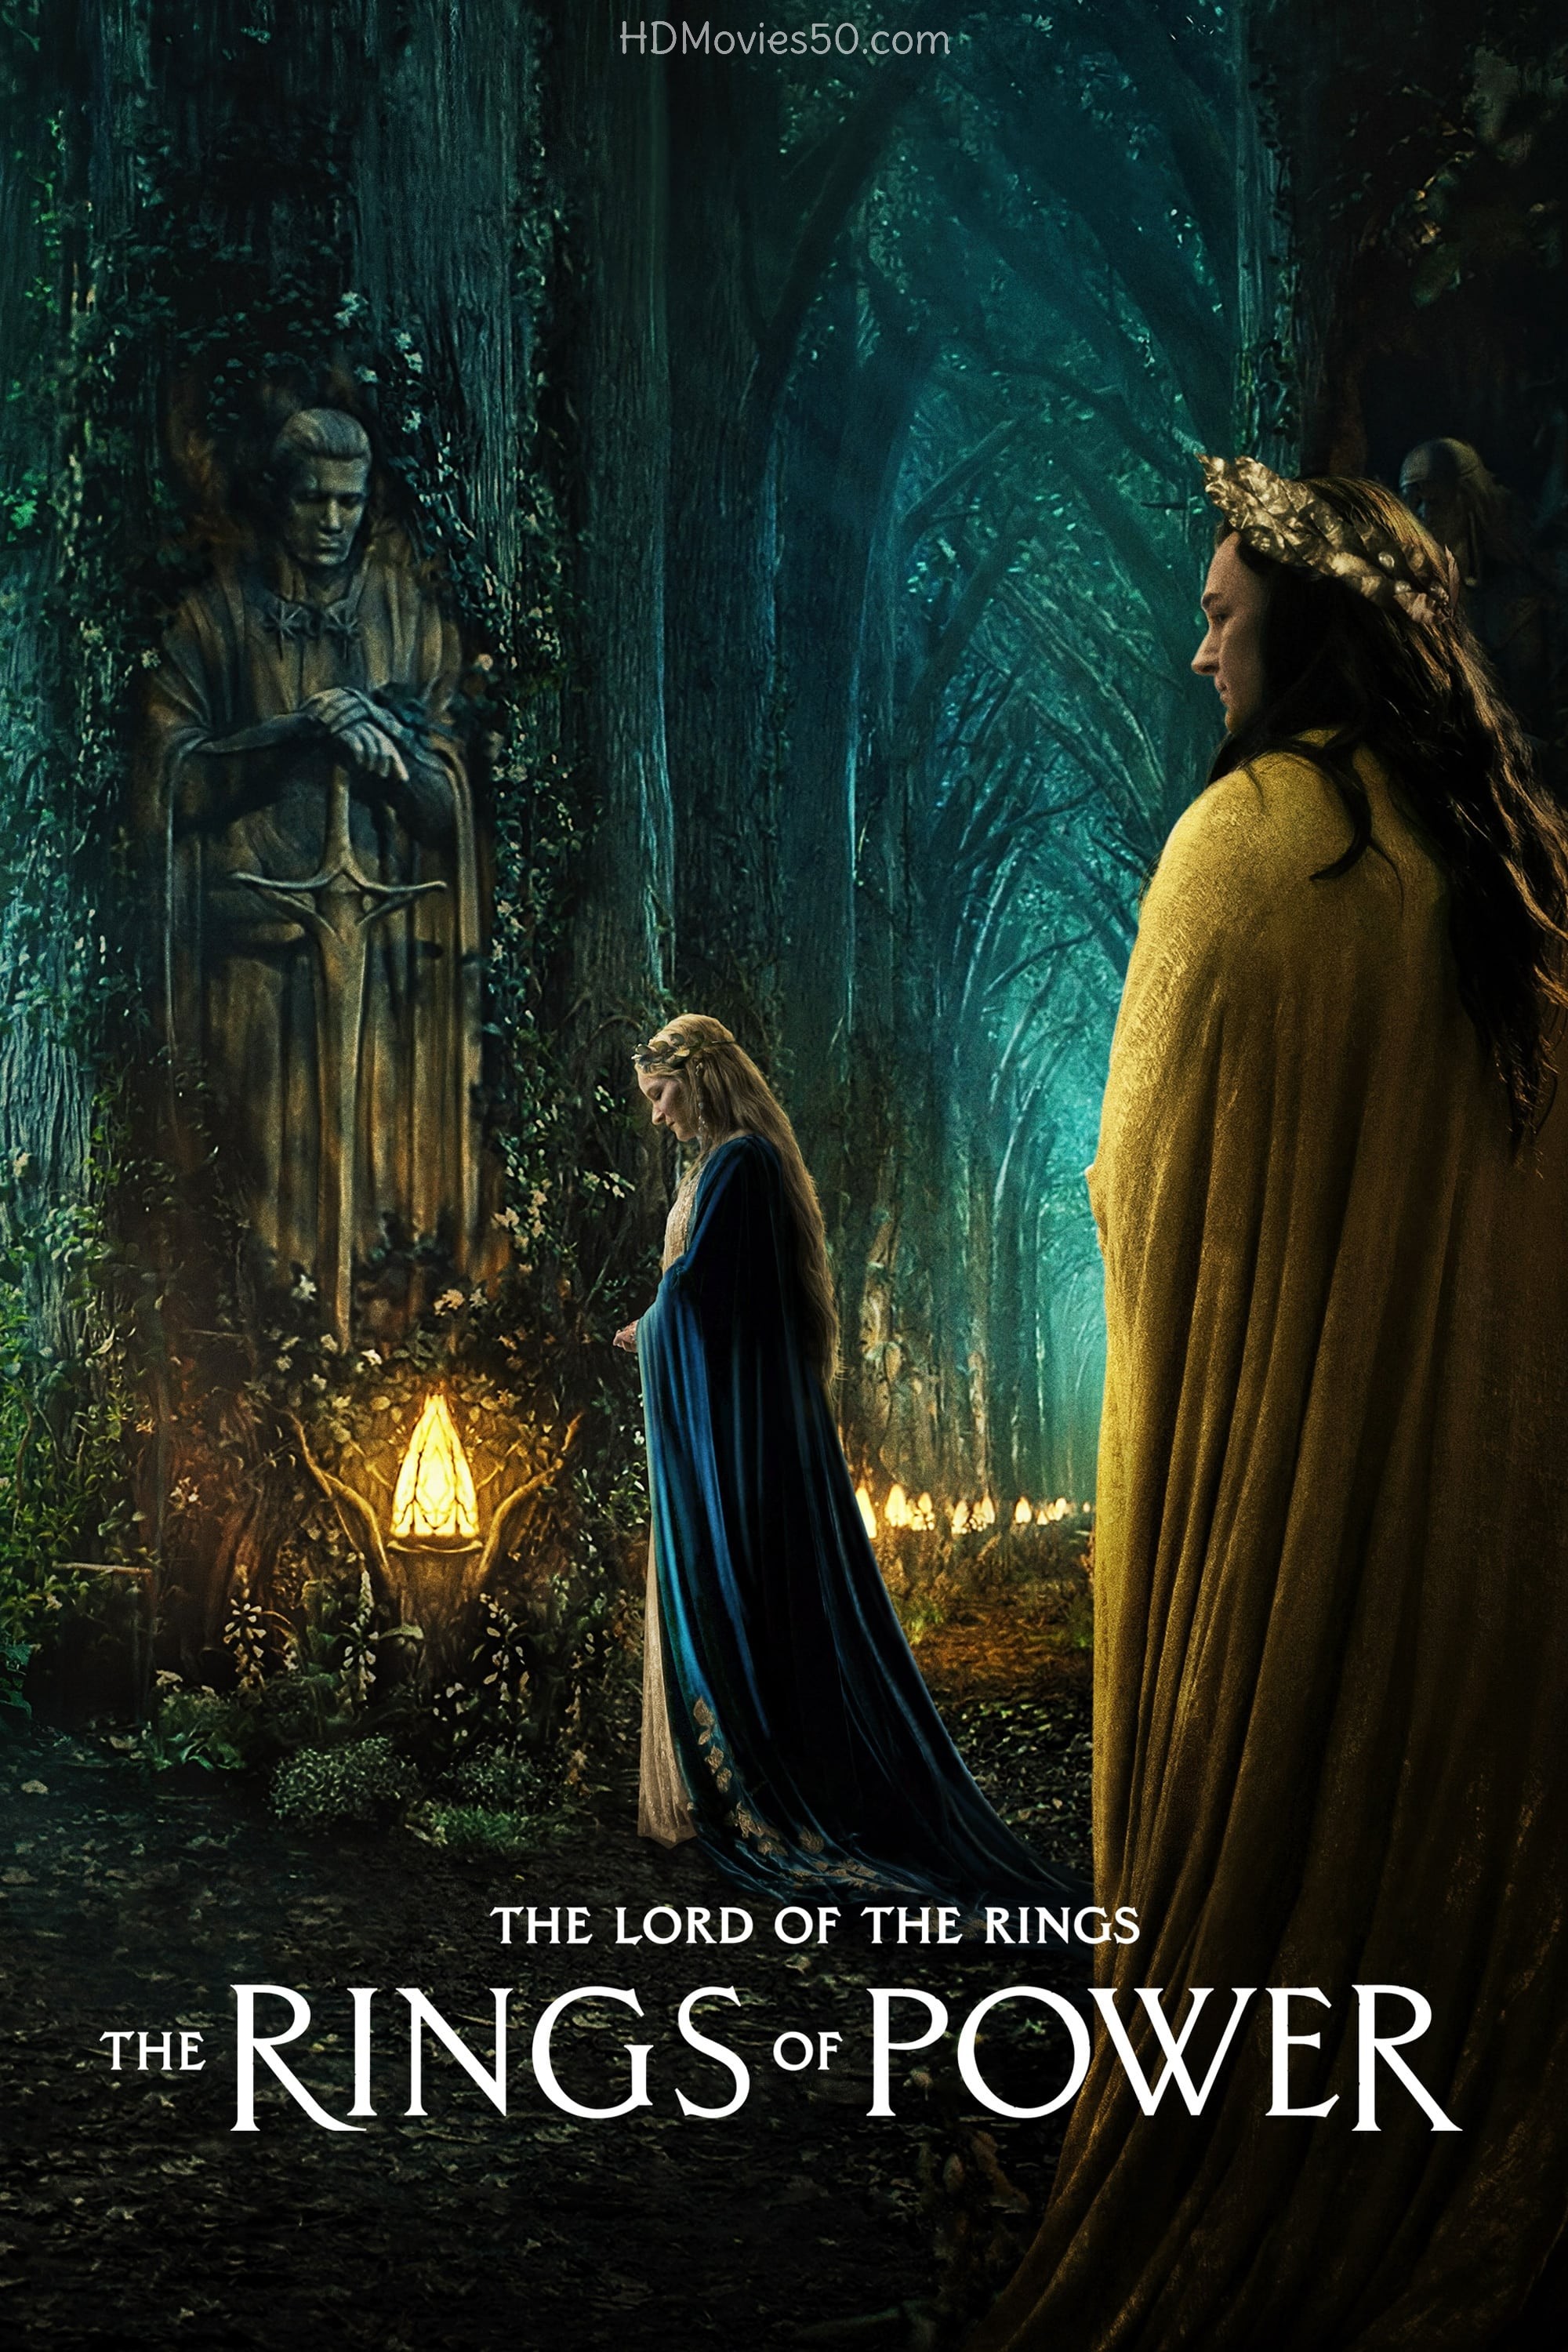 The Lord of The Rings The Rings Of Power 2022 S01E06 Hindi ORG Dual Audio 1080p AMZN HDRip MSub 1.21GB Download